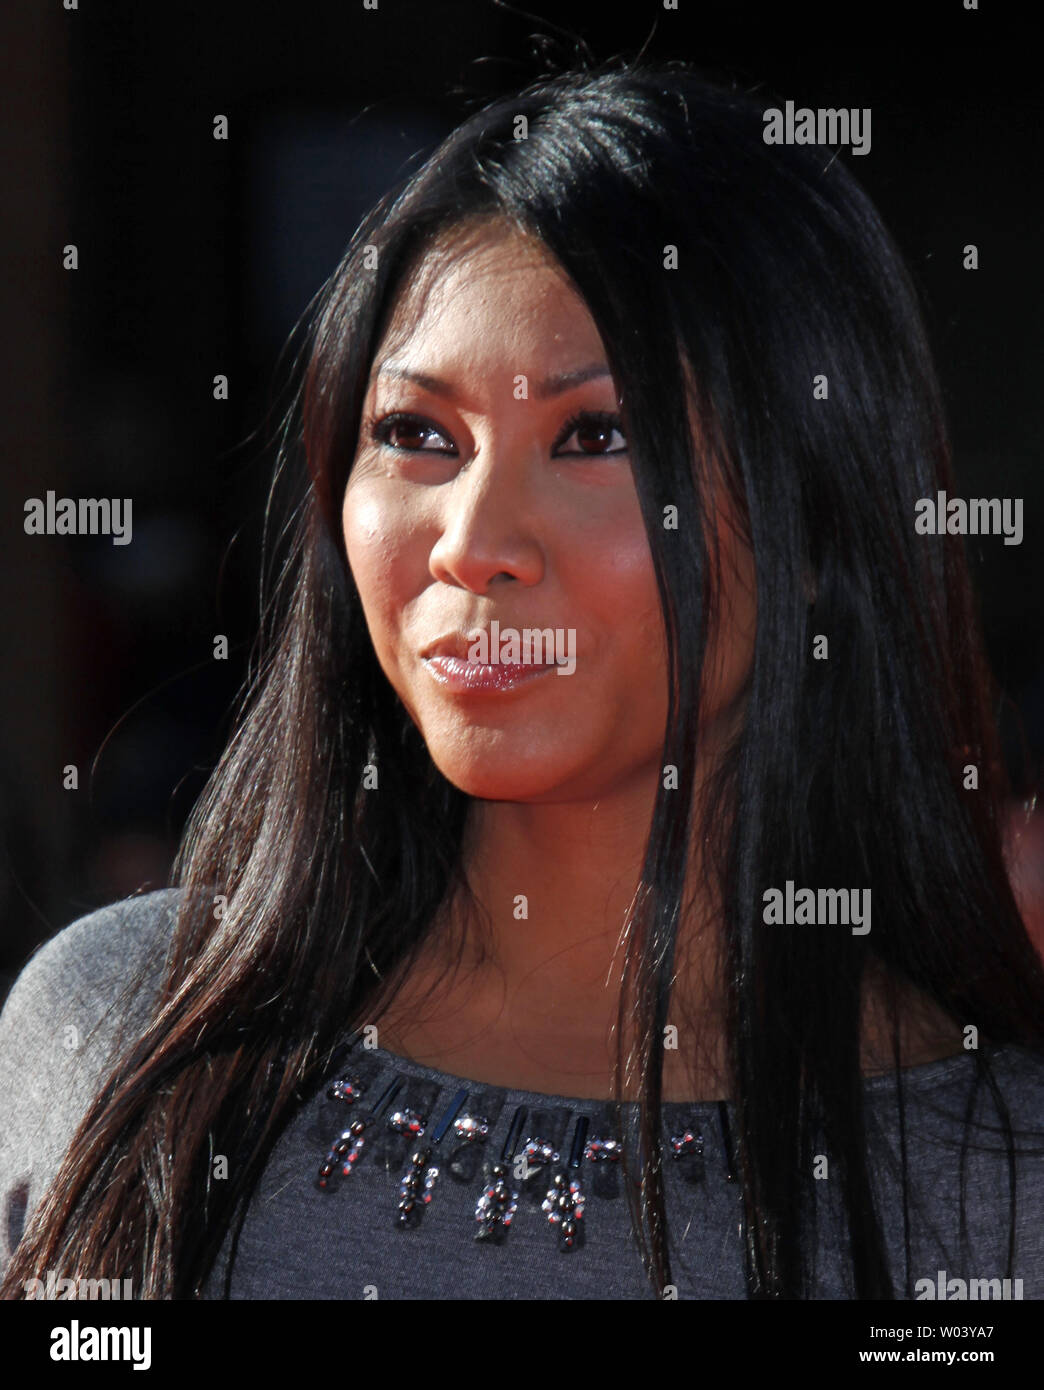 Anggun arrives on the red carpet during the 4th Rome International Film Festival in Rome on October 16, 2009.   UPI Photo/David Silpa Stock Photo